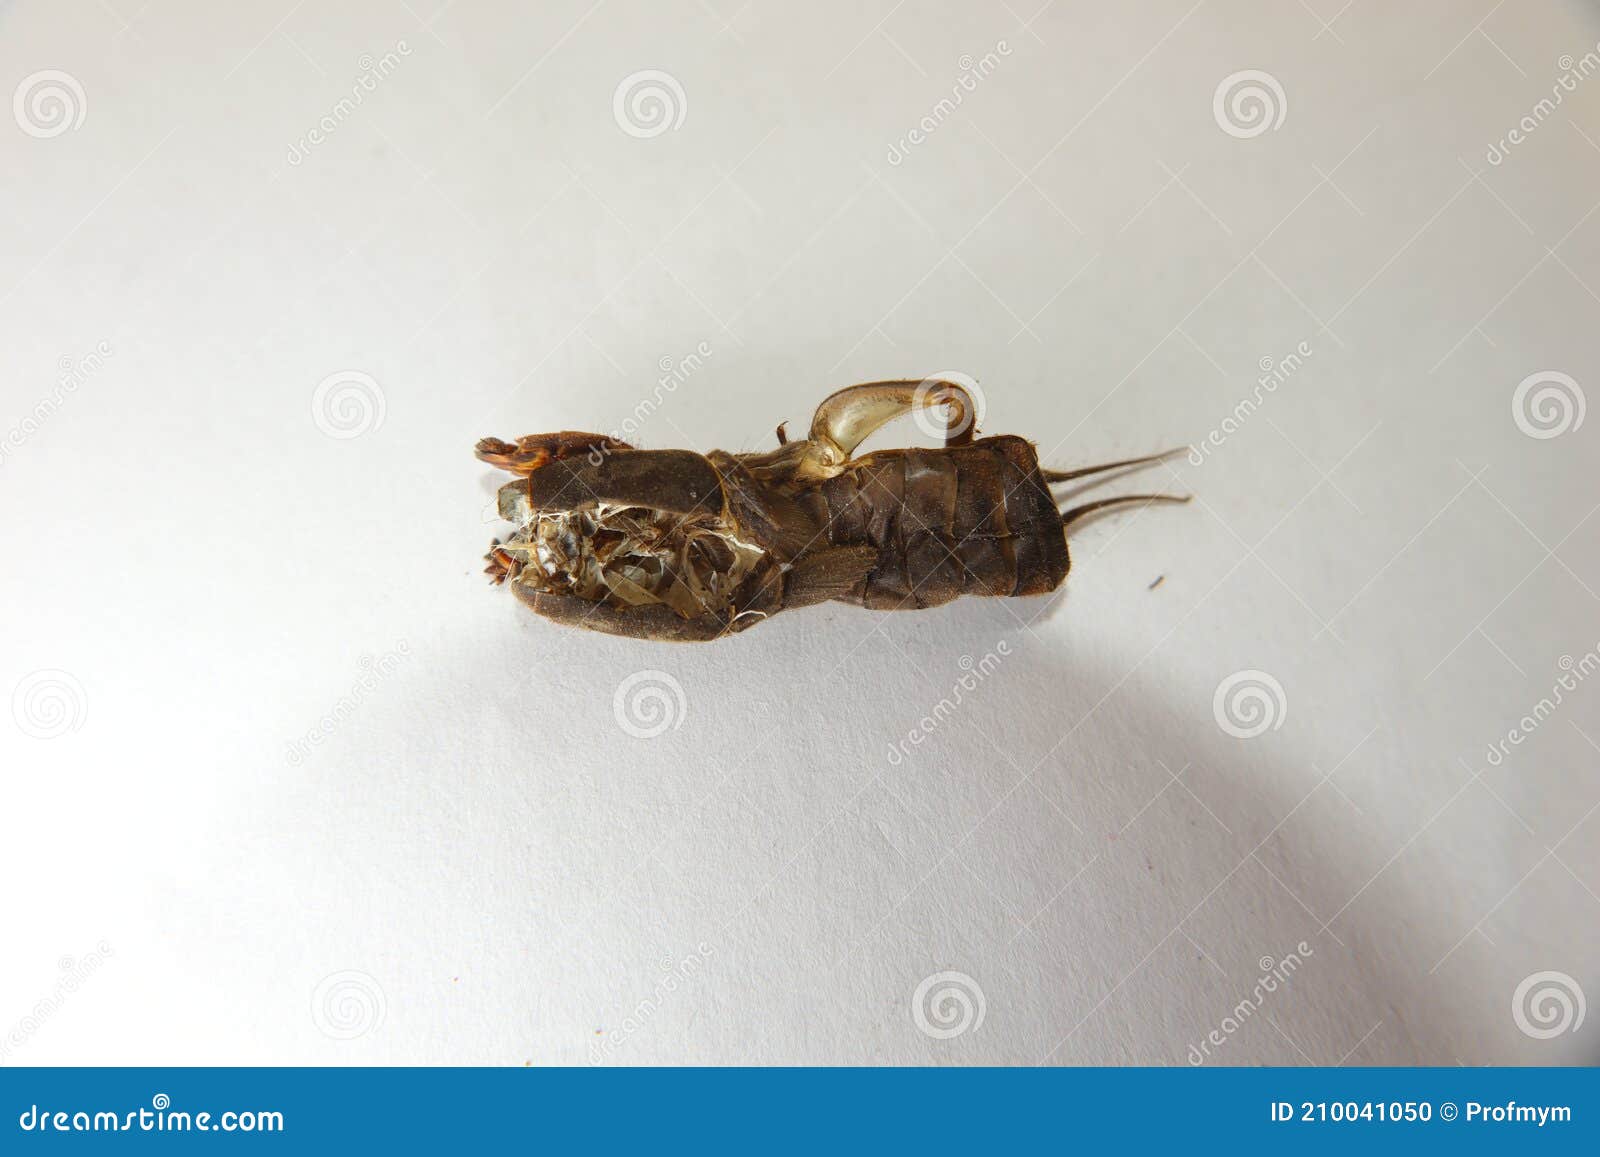 Mole Cricket. Close Up of Shed Mole Cricket Skin on a White Background  Stock Photo - Image of cricket, colorful: 210041050